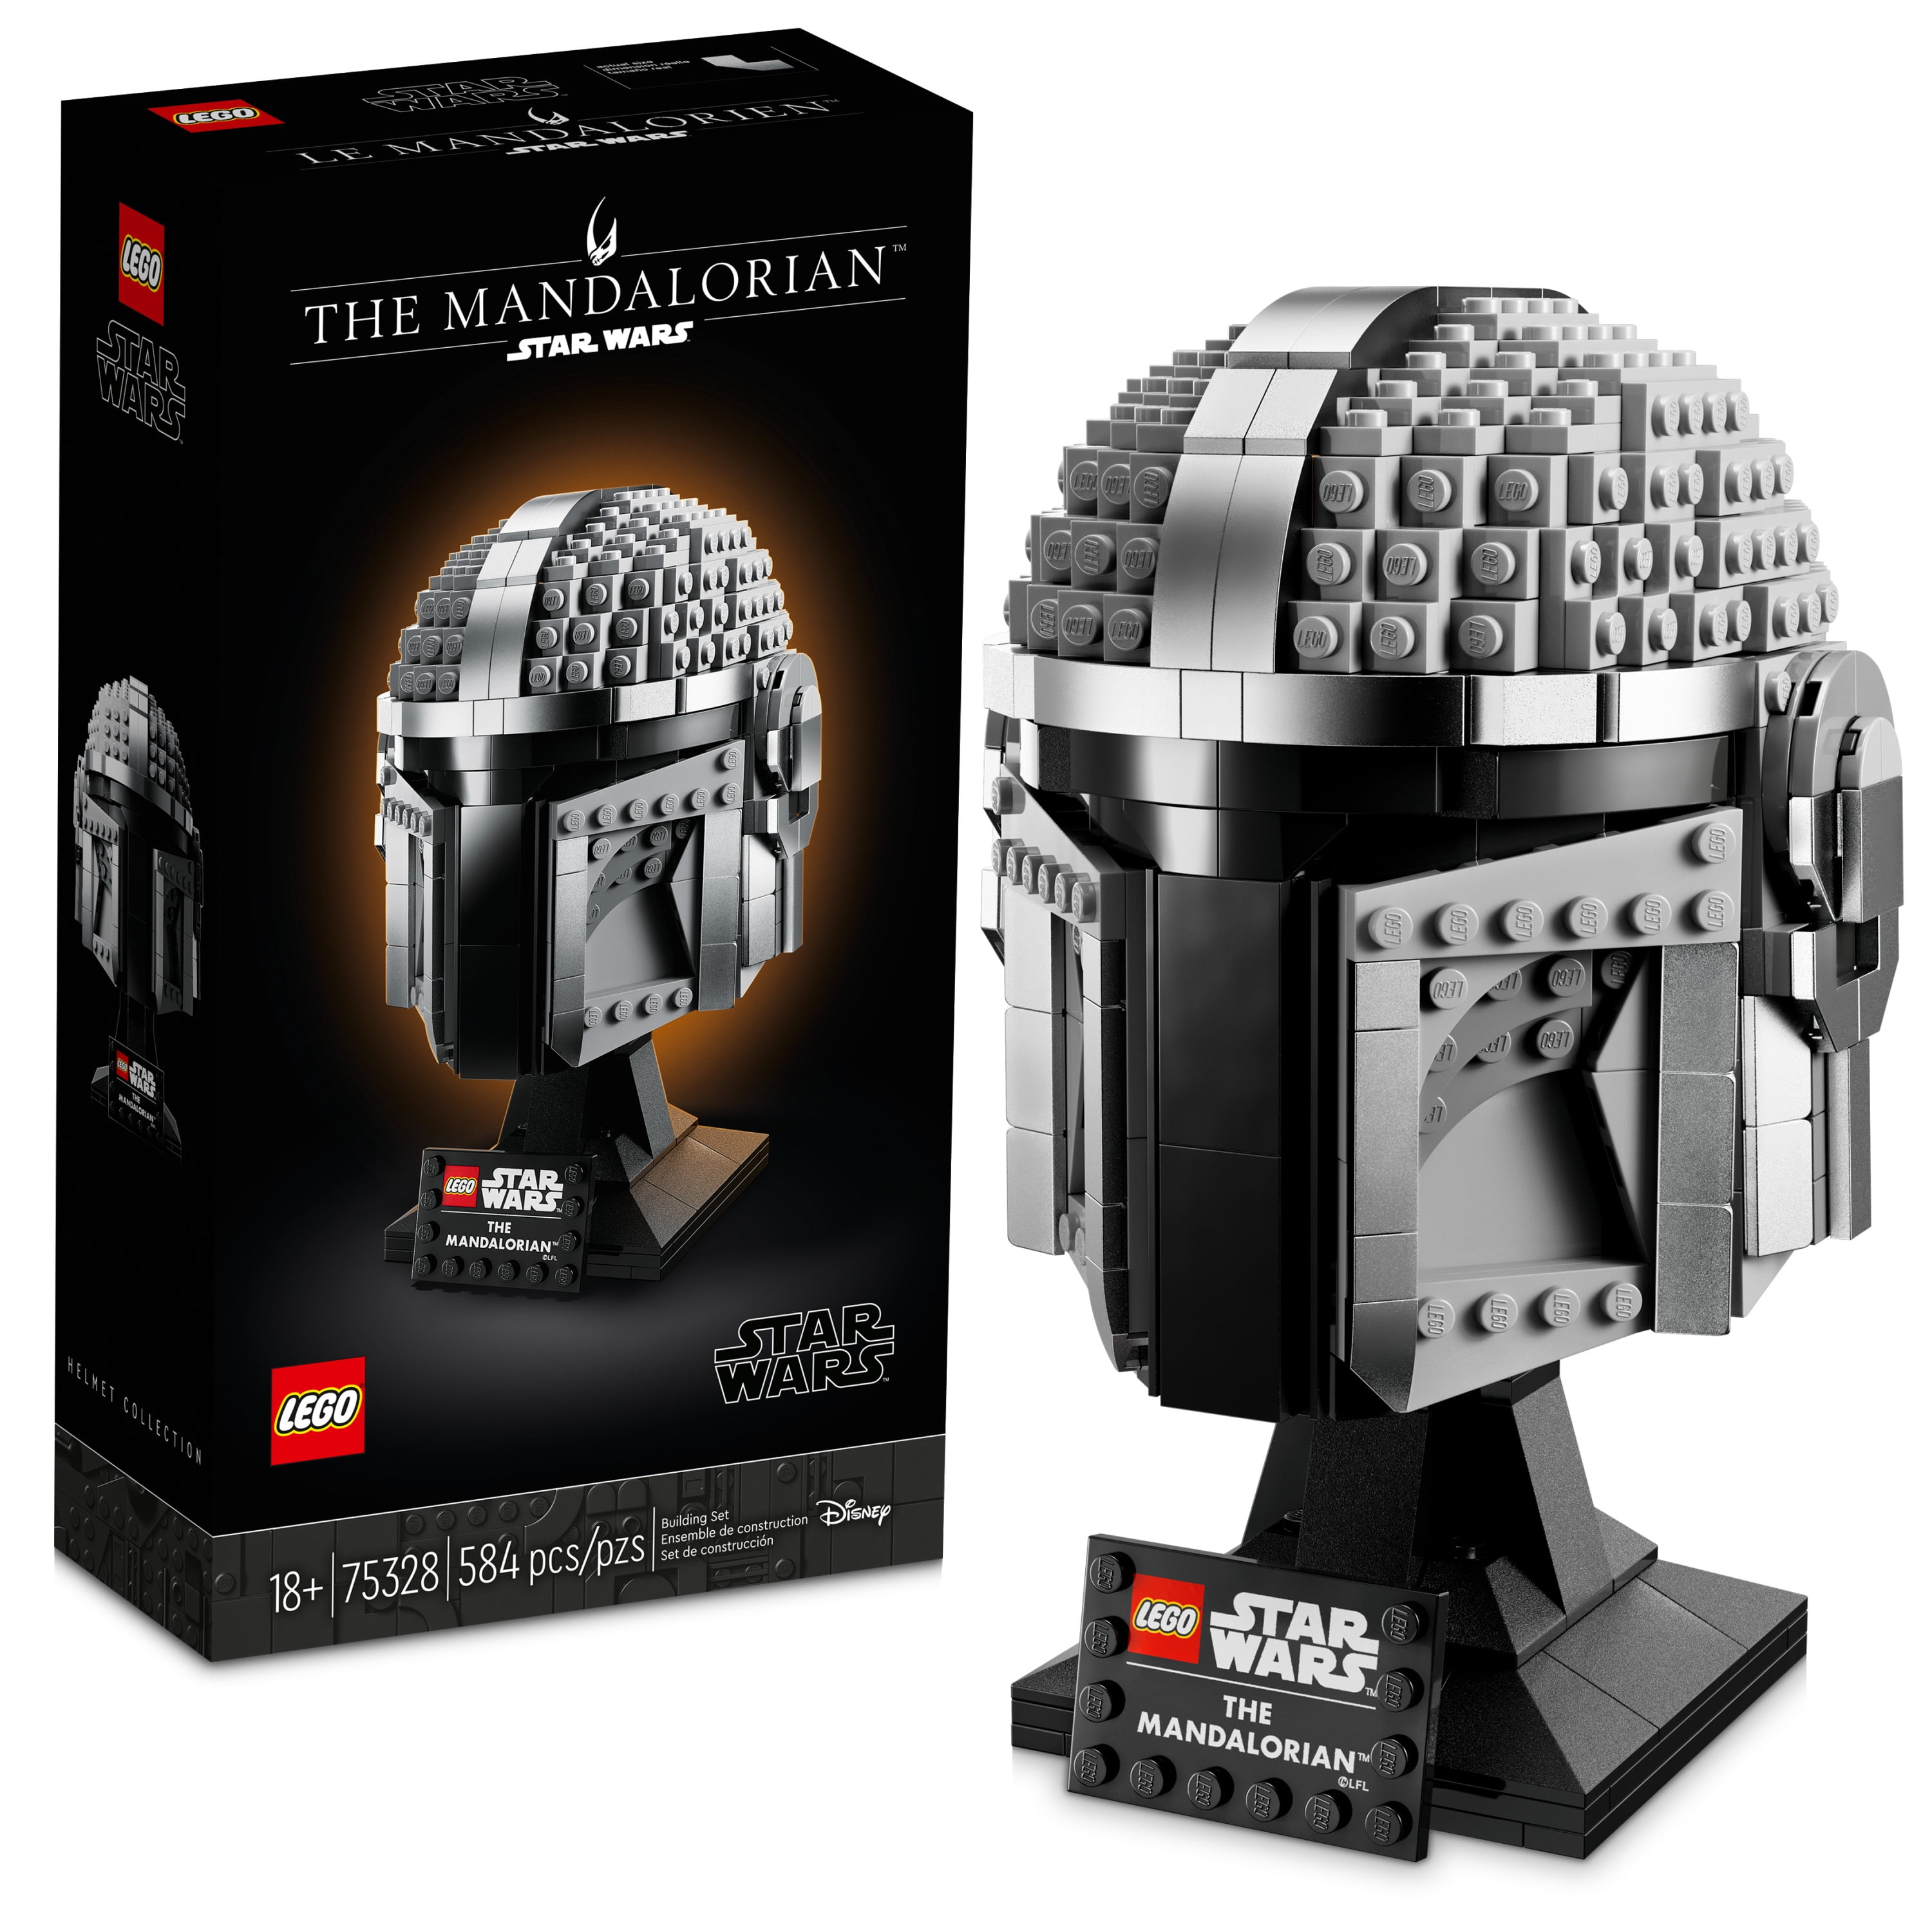 LEGO Star Wars The Mandalorian Helmet 75328 Creative Building Kit for Adults; Collectible Build-and-Display Model; Fun Holiday Gift, Birthday Present or Surprise Treat for Fans (584 Pieces)